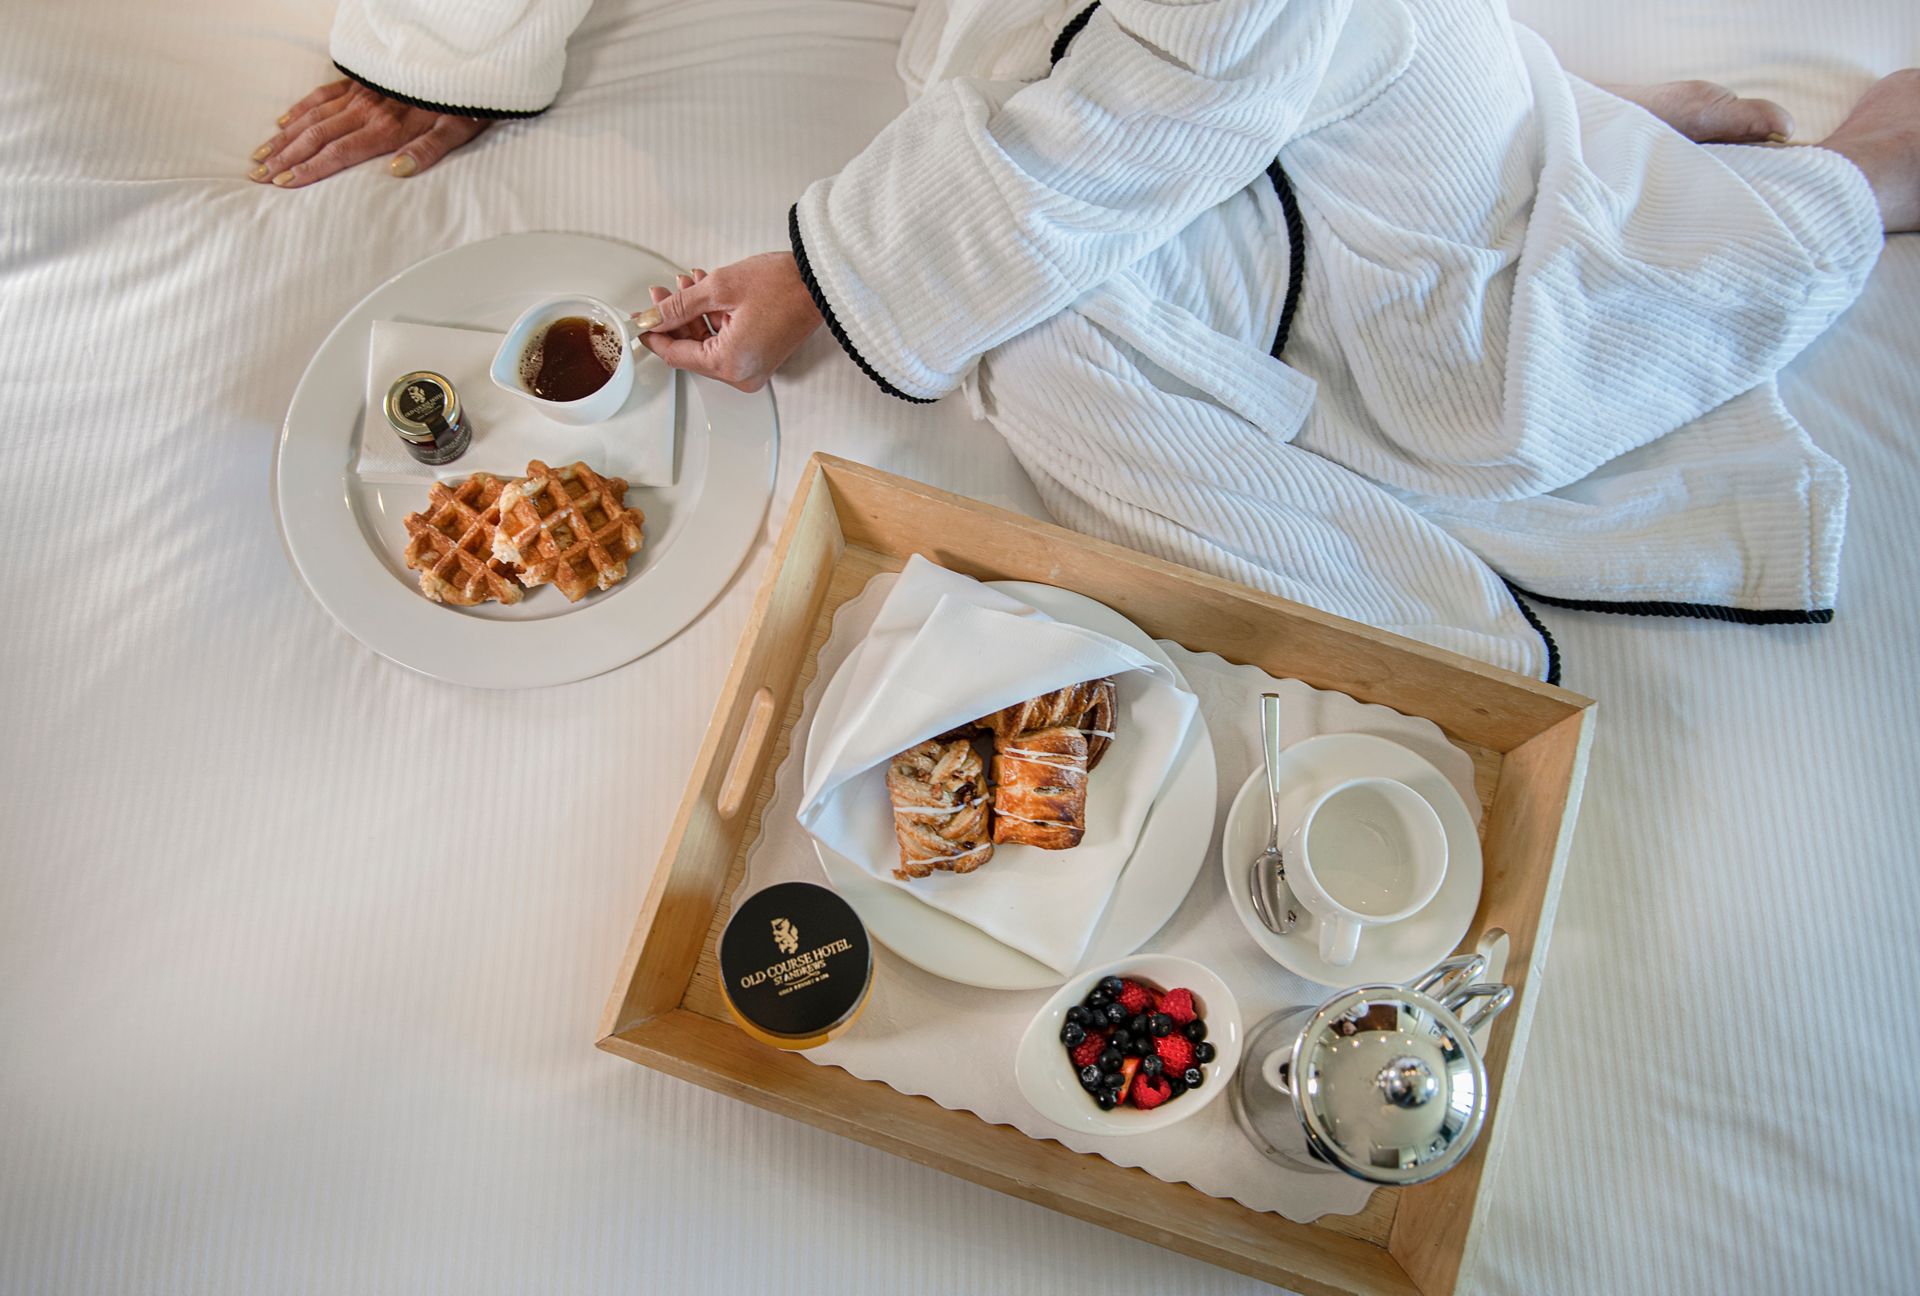 A guest sitting on the bed with a breakfast tray with syrup, waffles, pastry and fruit.